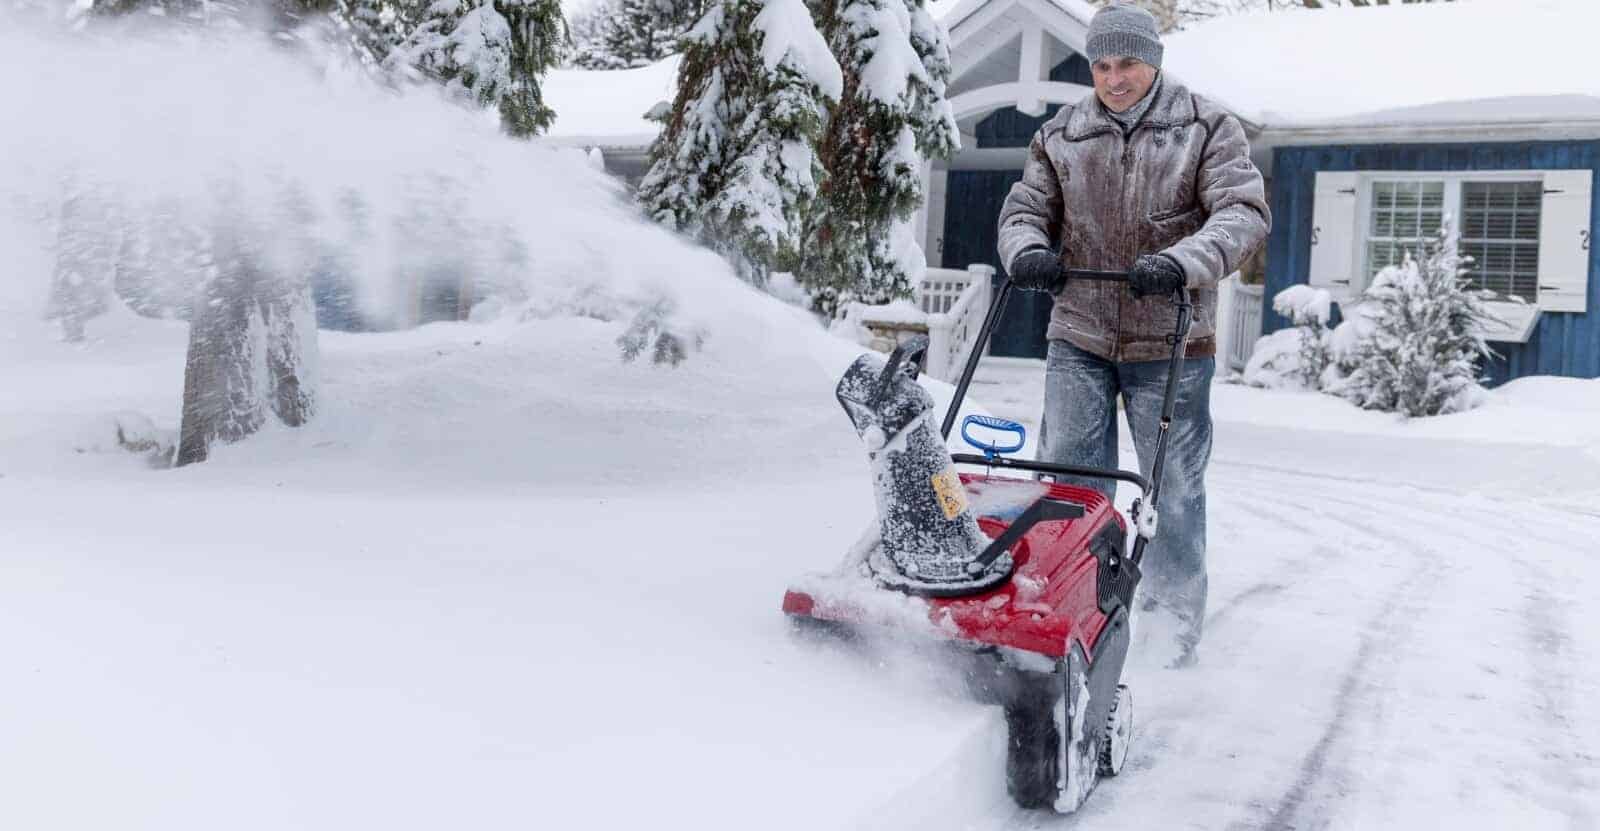 best single stage snow blower reviews